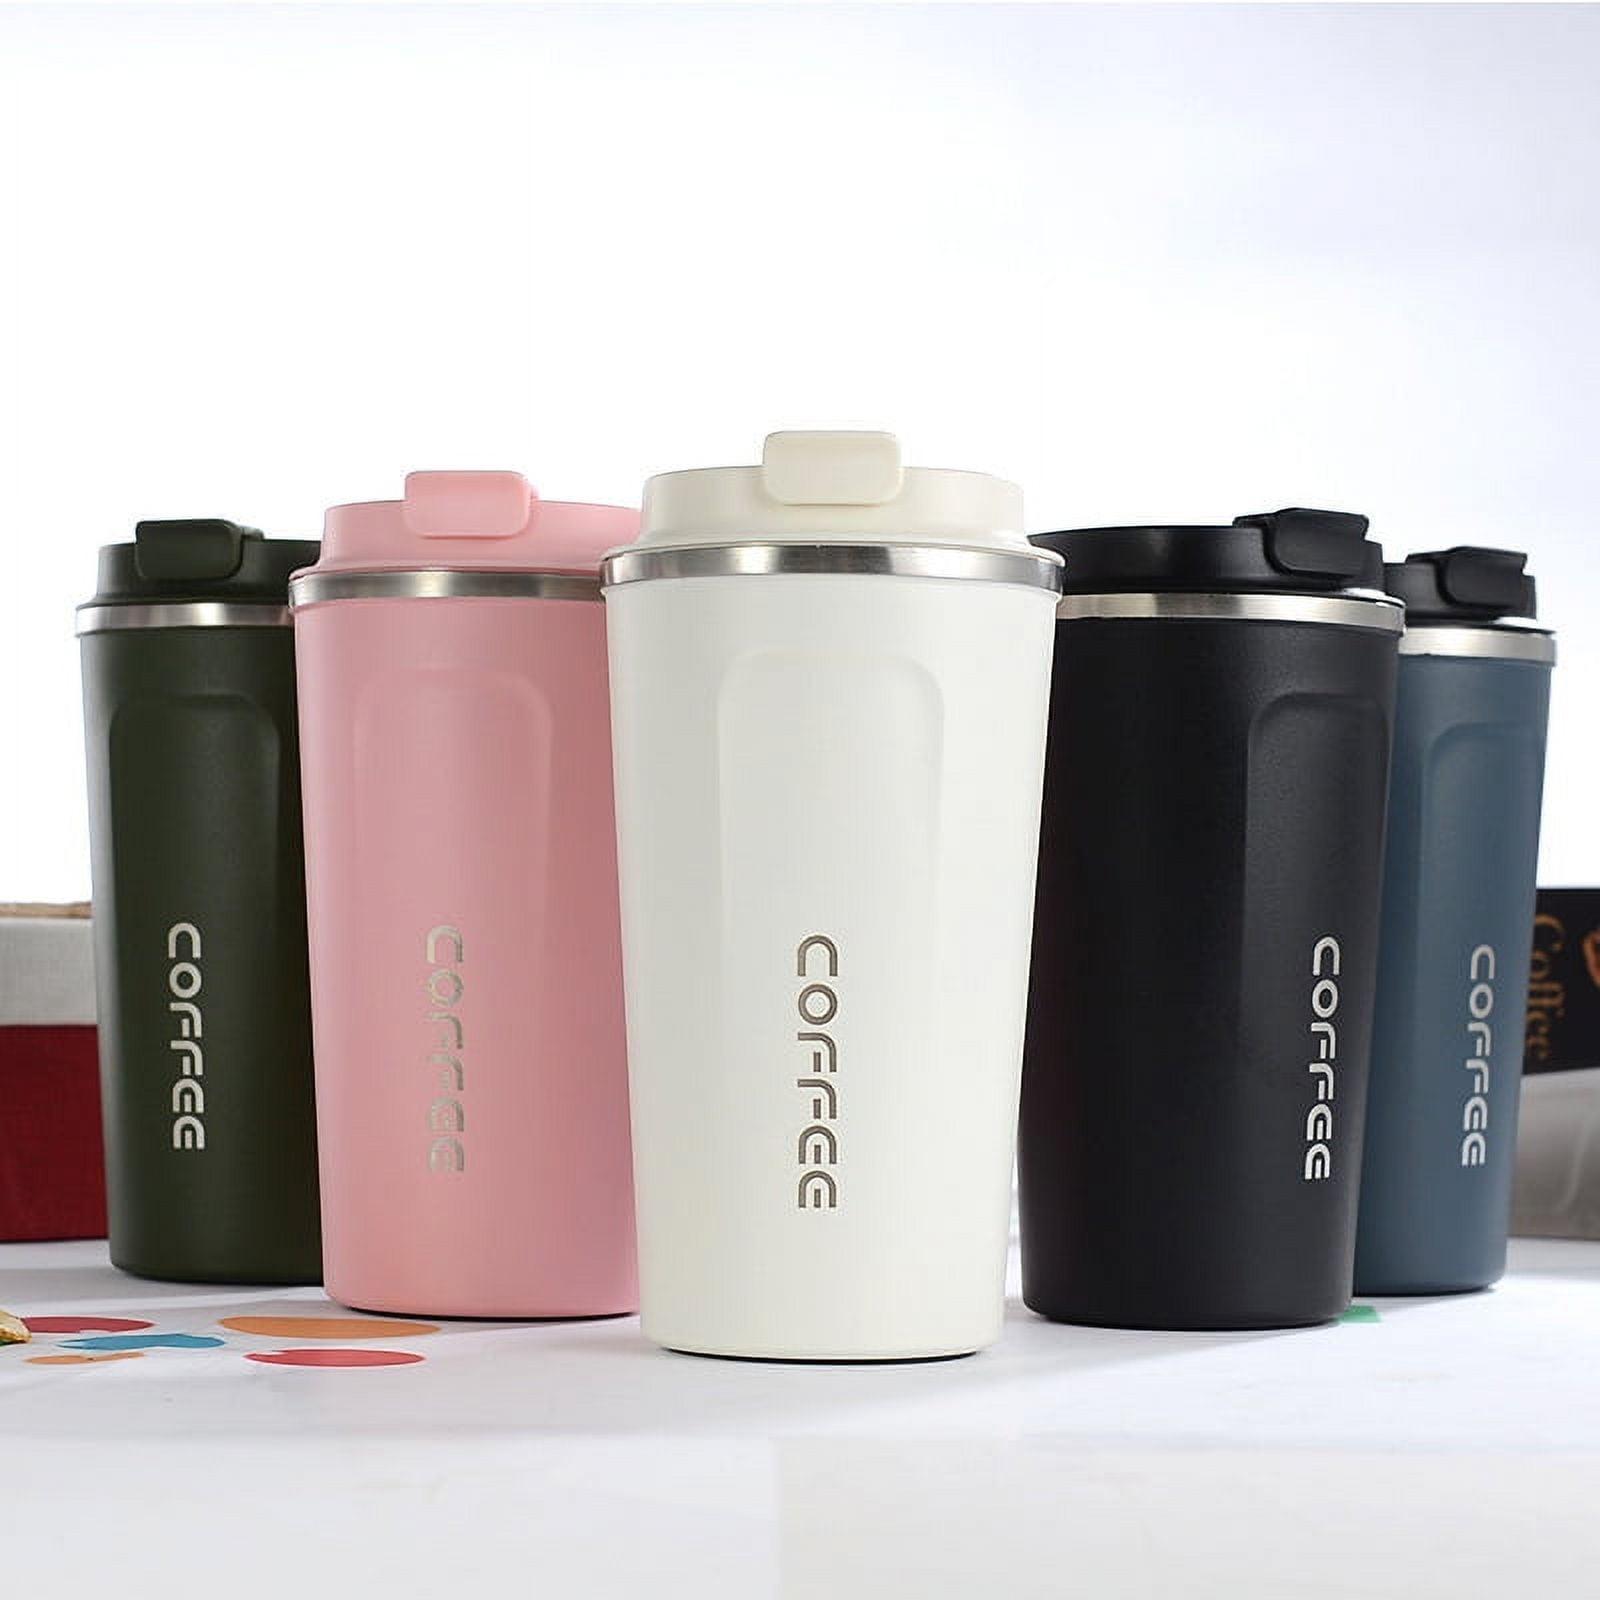 510ML Stainless Steel Smart Coffee Tumbler Thermos Cup with Intelligent  Temperature Display Portable Leak-Proof Travel Mug - AliExpress